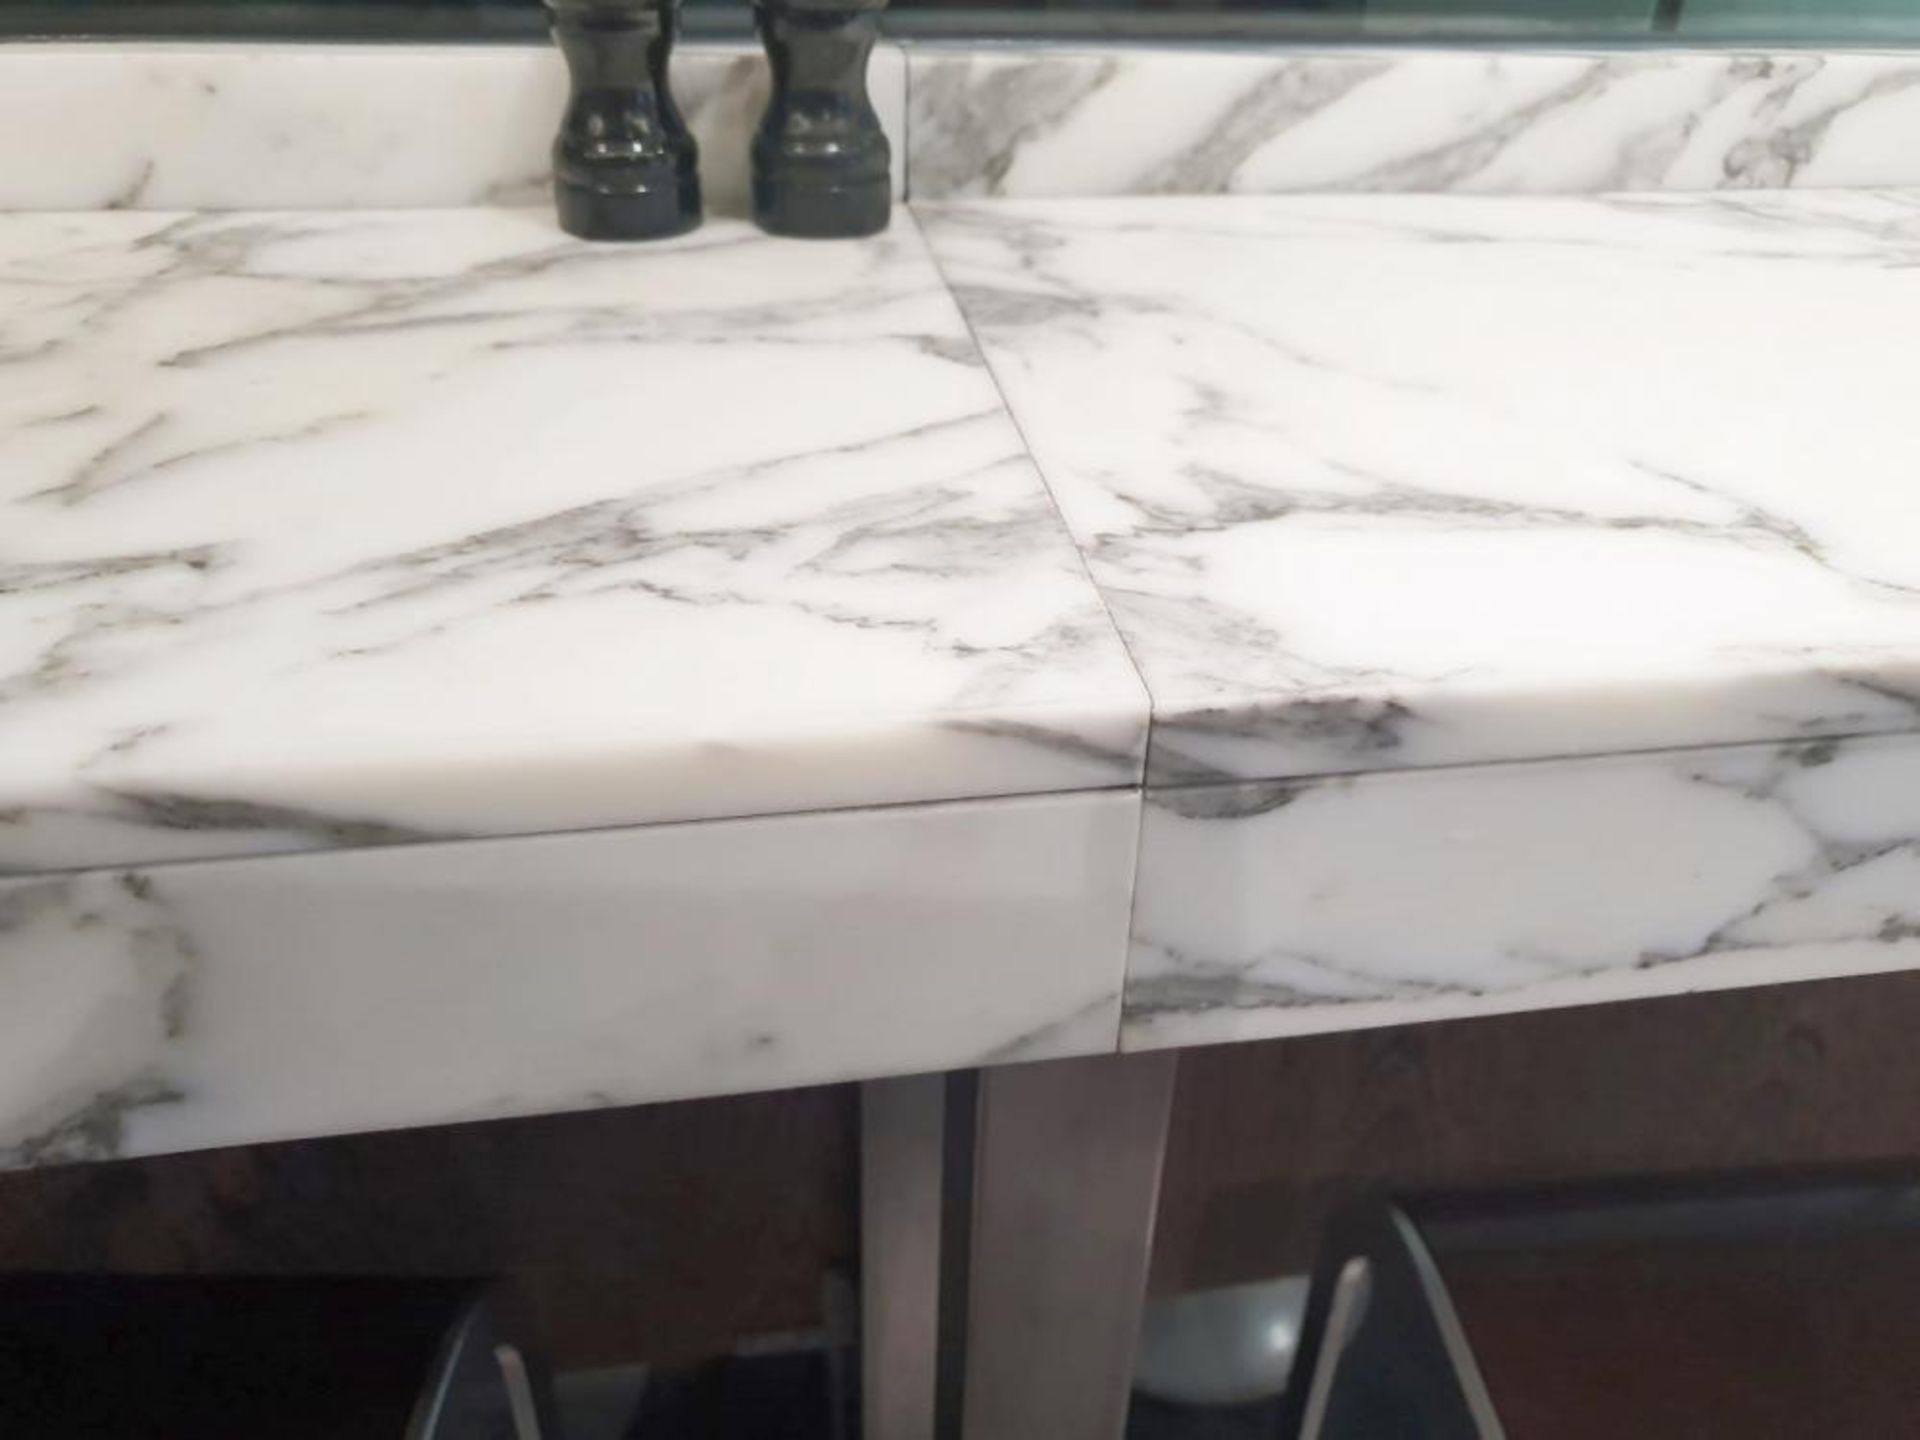 1 x White Marble/Granite Breakfast / Coffee Bar - Two Piece - From A Milan-style City Centre Cafe - Image 4 of 4